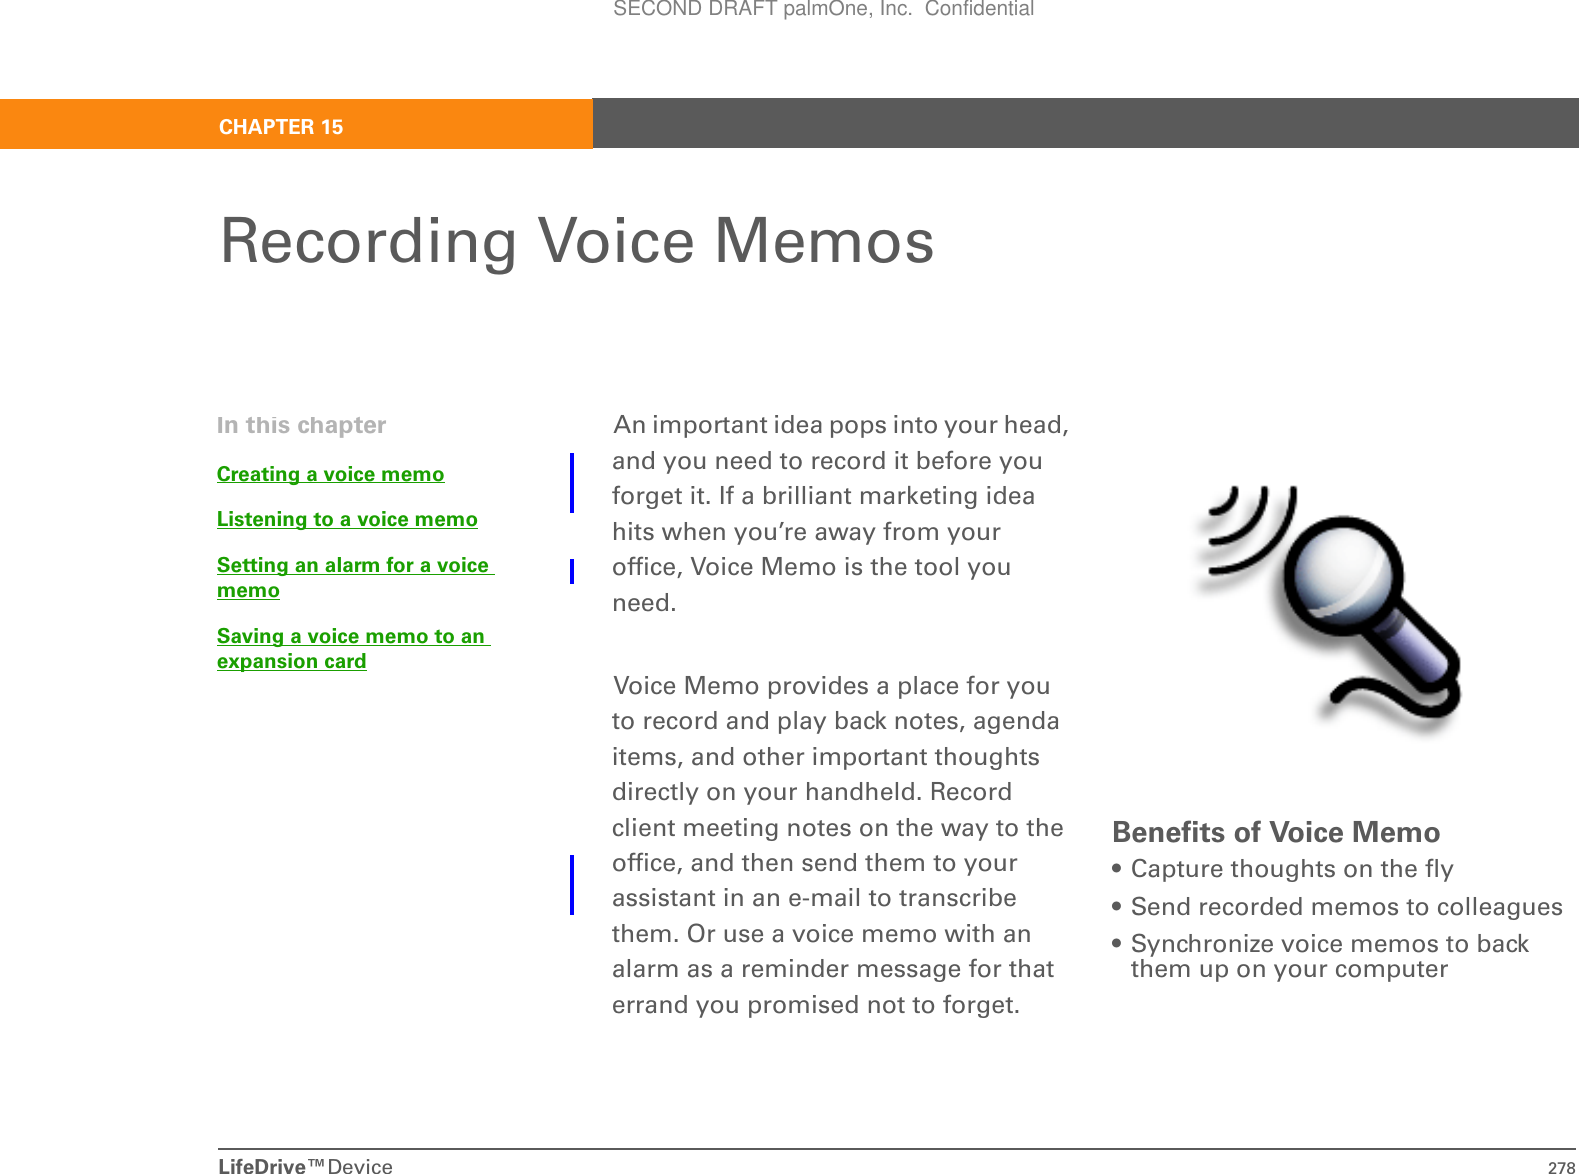 LifeDrive™Device 278CHAPTER 15Recording Voice MemosAn important idea pops into your head, and you need to record it before you forget it. If a brilliant marketing idea hits when you’re away from your office, Voice Memo is the tool you need.Voice Memo provides a place for you to record and play back notes, agenda items, and other important thoughts directly on your handheld. Record client meeting notes on the way to the office, and then send them to your assistant in an e-mail to transcribe them. Or use a voice memo with an alarm as a reminder message for that errand you promised not to forget.Benefits of Voice Memo• Capture thoughts on the fly• Send recorded memos to colleagues• Synchronize voice memos to back them up on your computerIn this chapterCreating a voice memoListening to a voice memoSetting an alarm for a voice memoSaving a voice memo to an expansion cardSECOND DRAFT palmOne, Inc.  Confidential